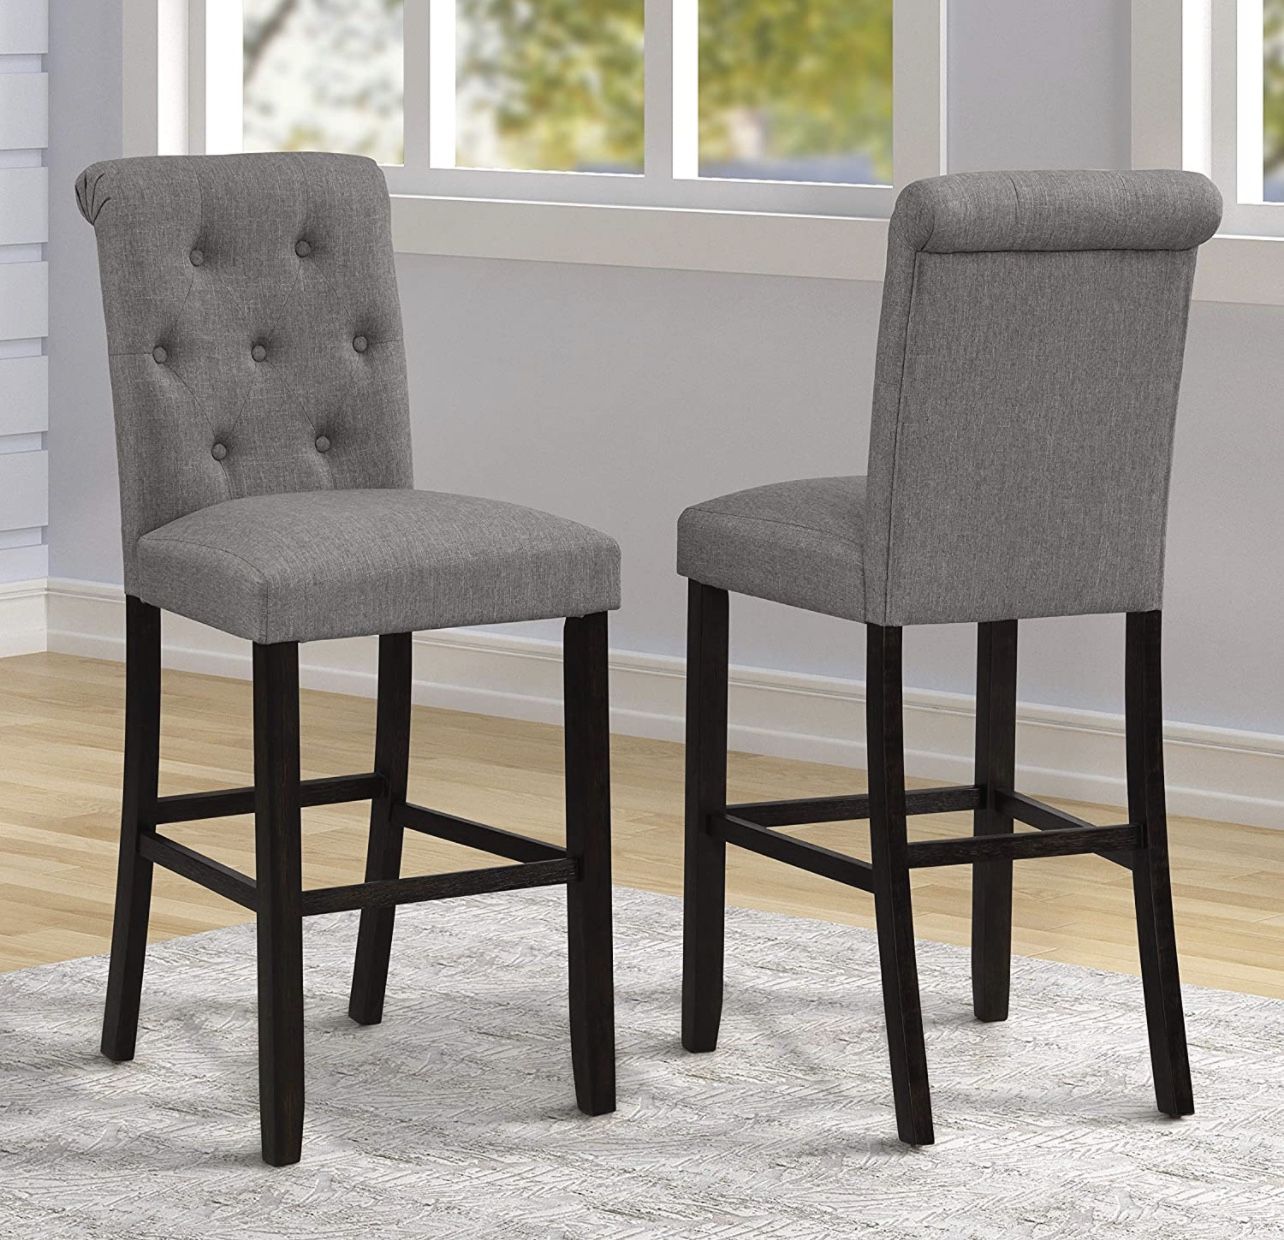 Set of 4 Brand New 29” tufted Barstools counter height bar stools - gray